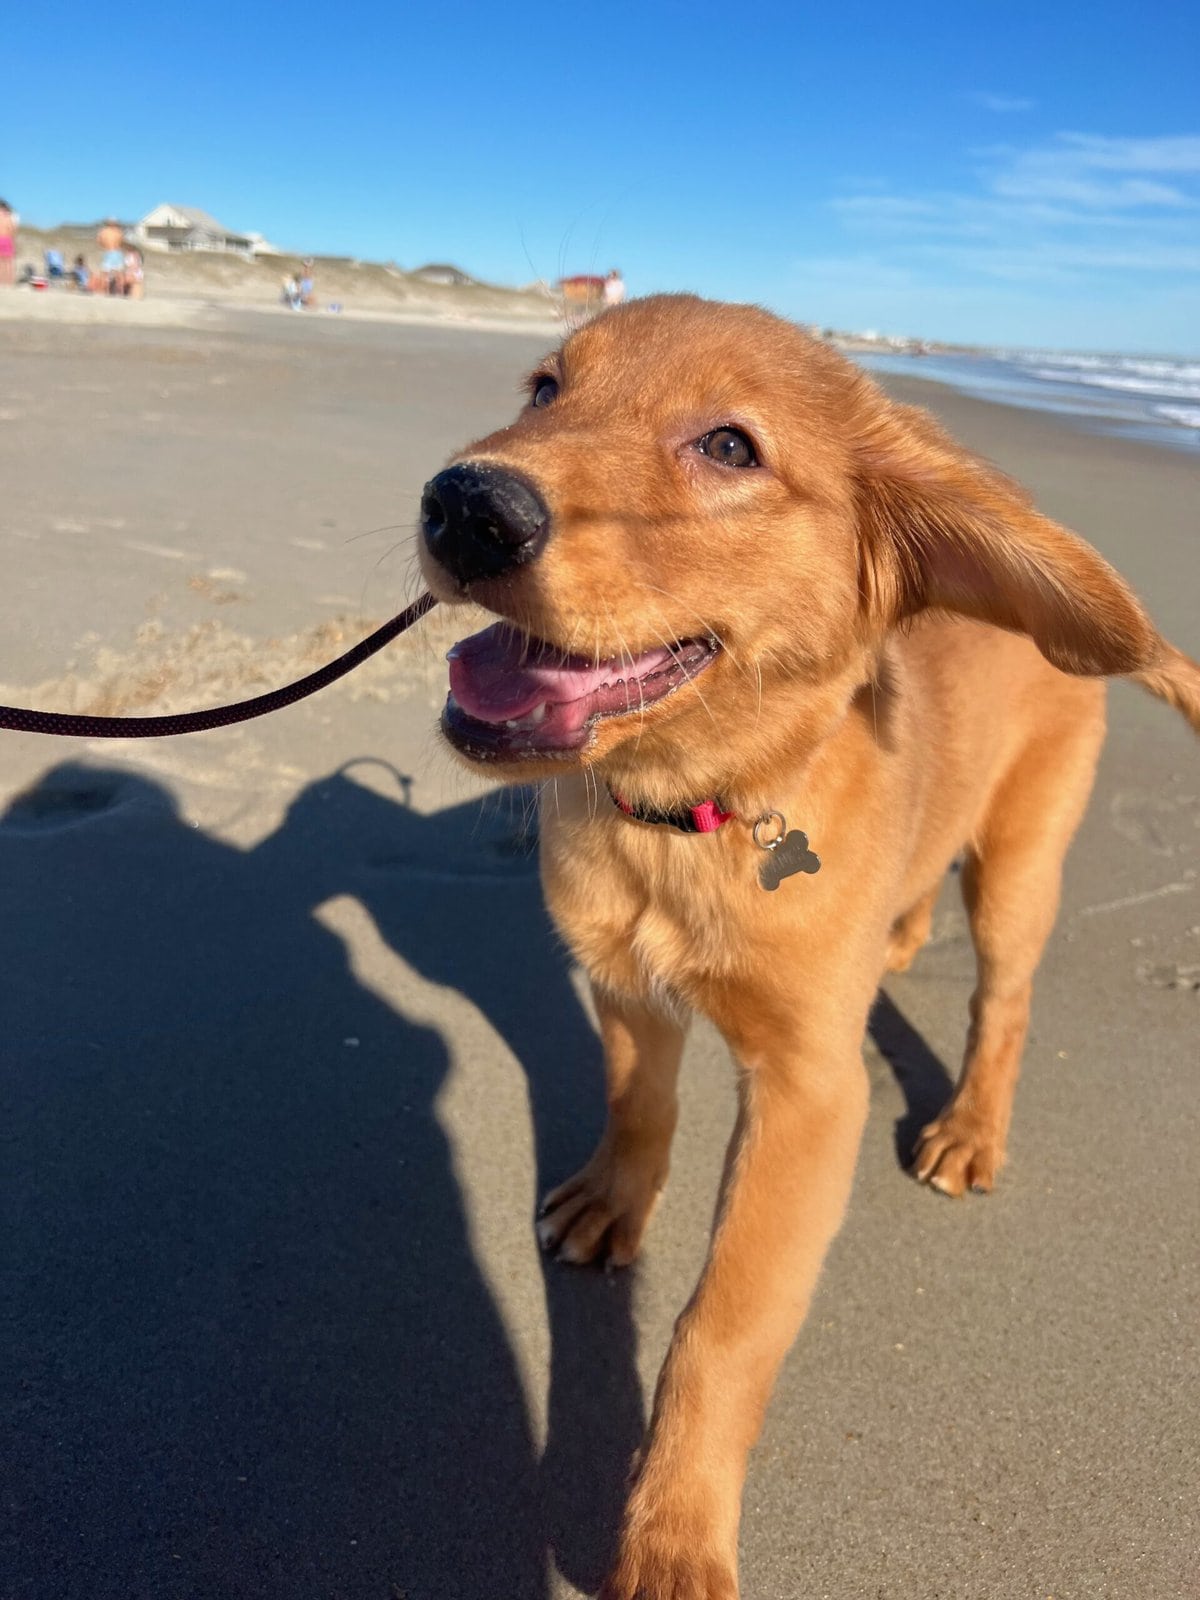 Banks the Golden Retriever smiling and playing on the beach